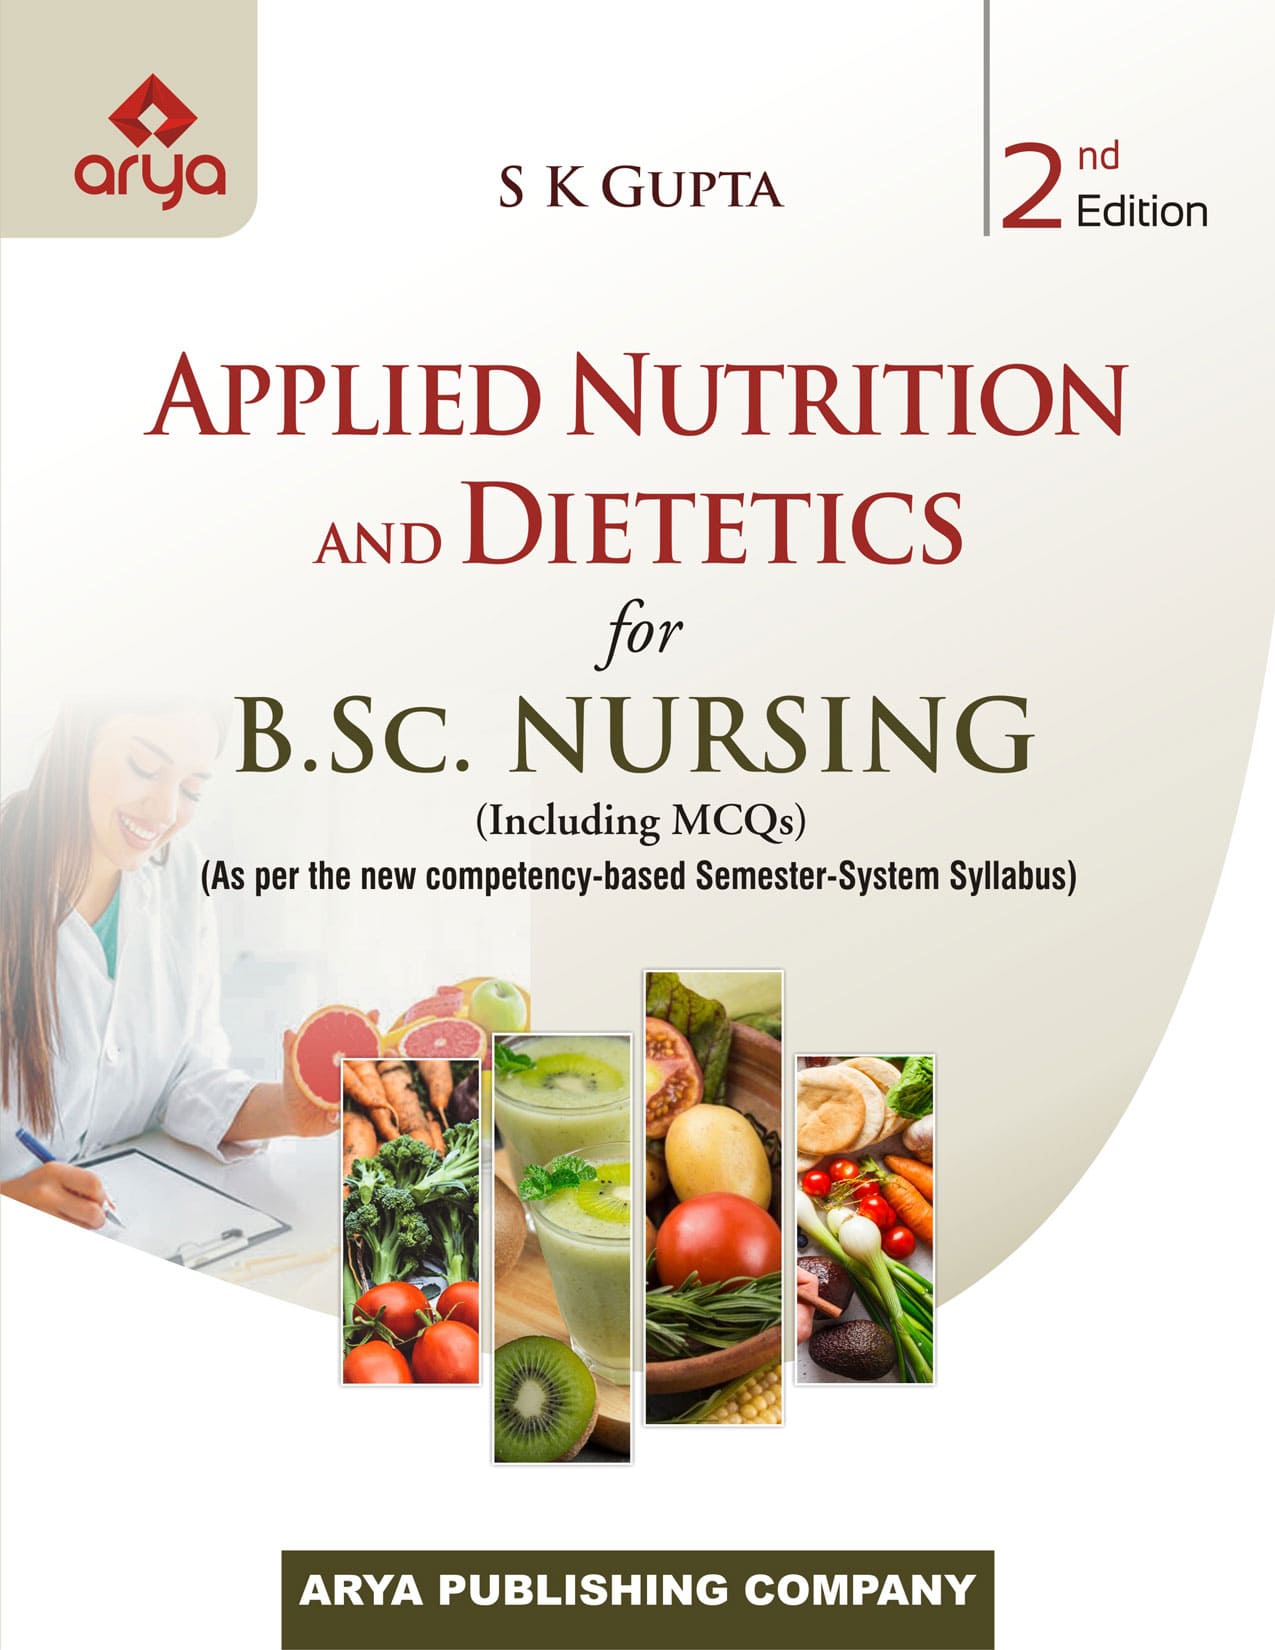 Applied Nutrition And Dietetics For B.Sc. Nursing (Including MCQs)